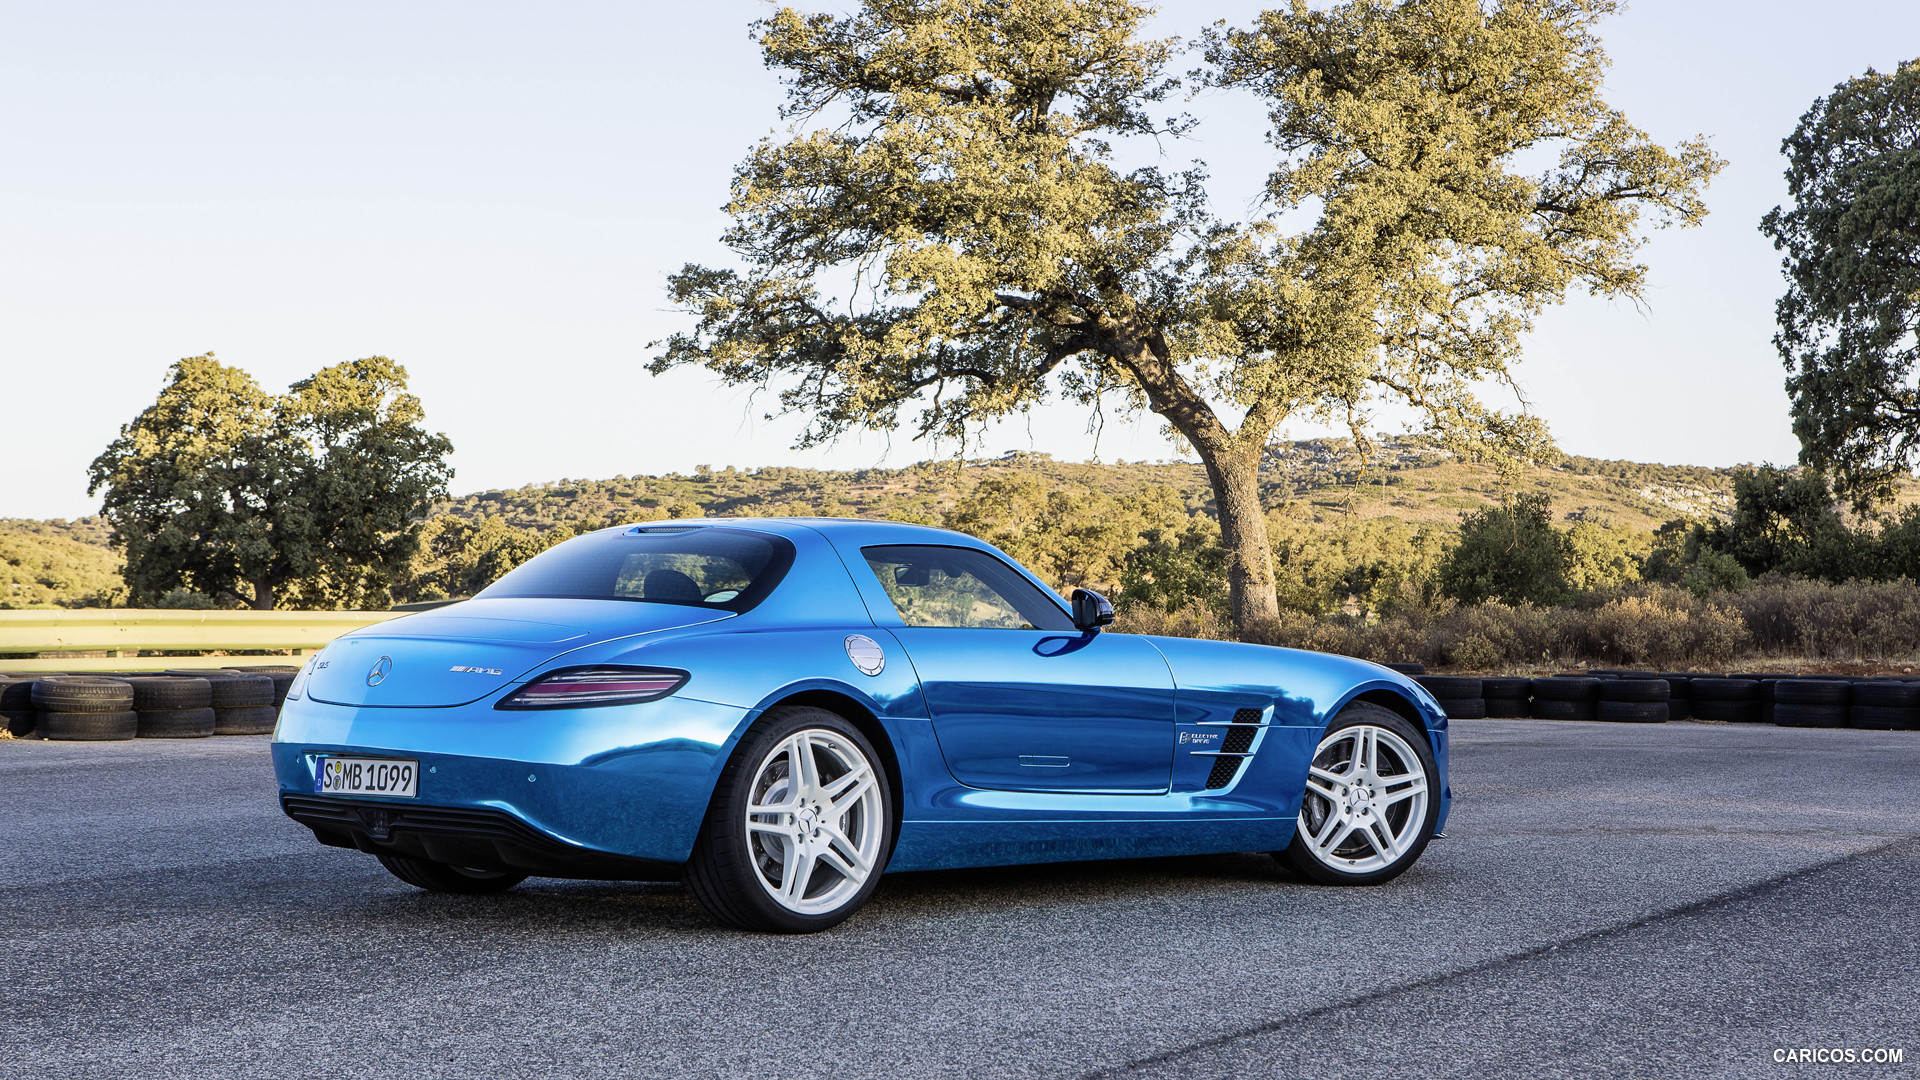 2014 Mercedes-Benz SLS AMG Coupe Electric Drive  - Rear, #4 of 47